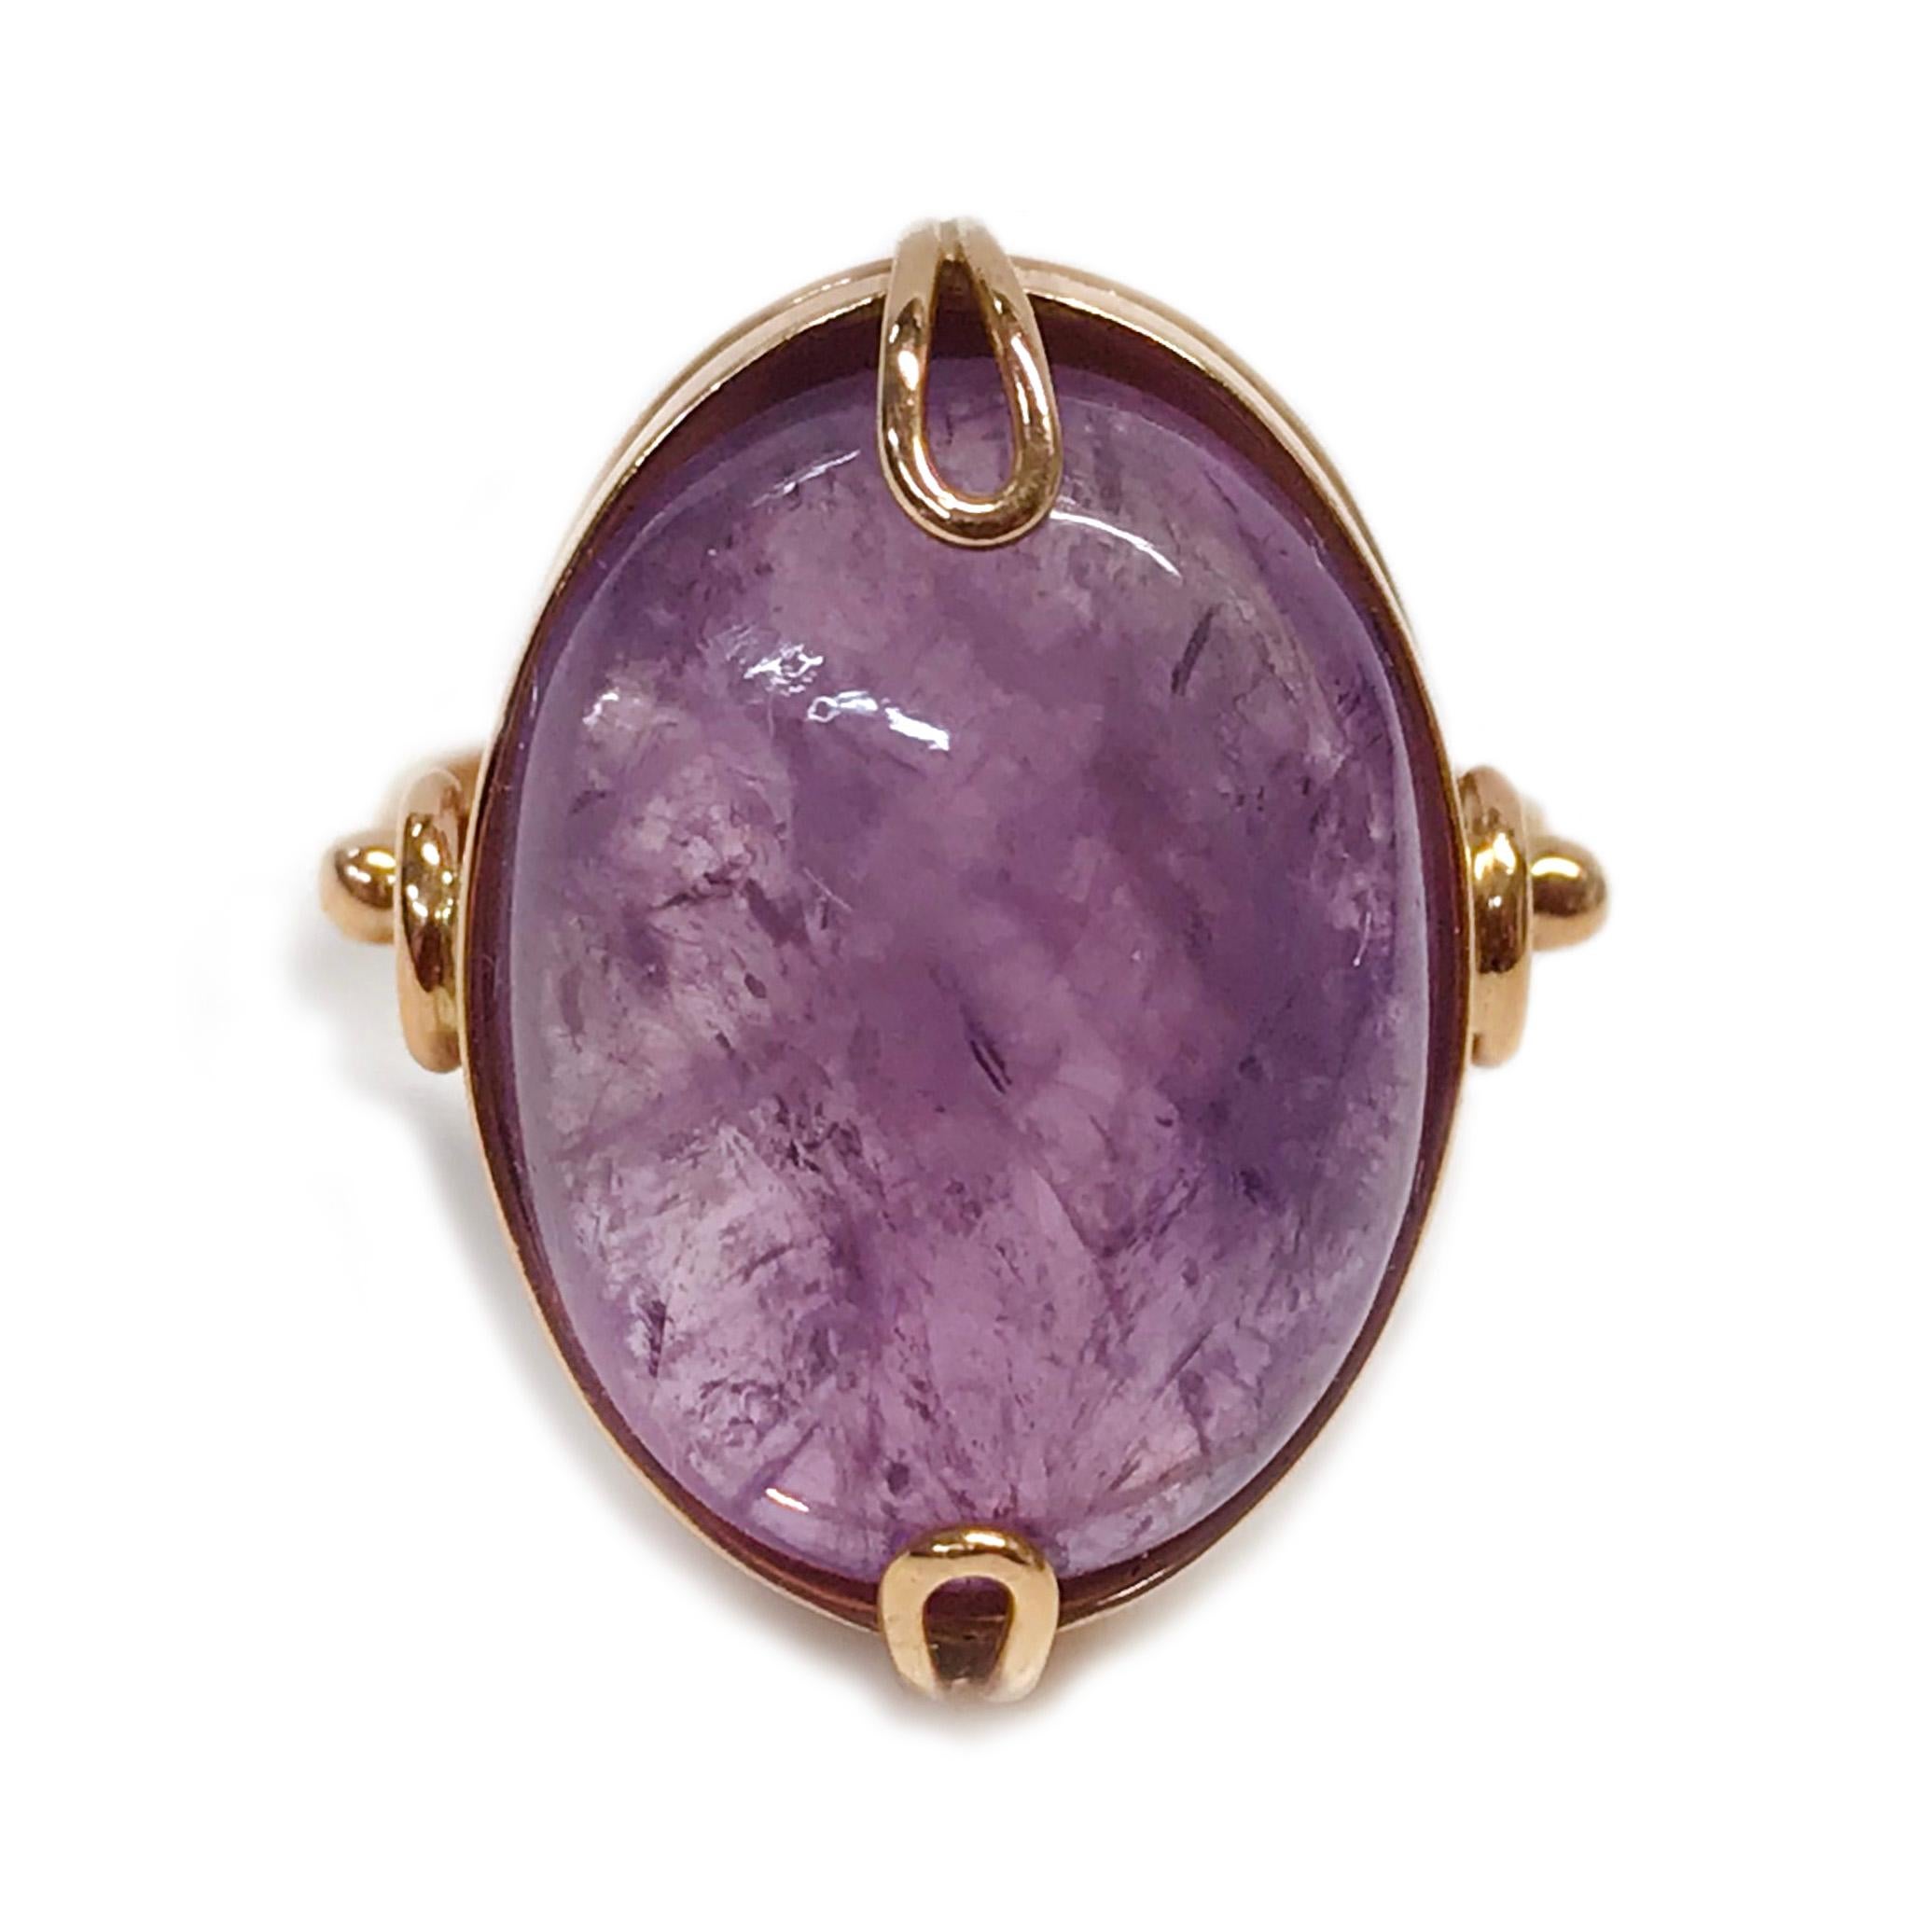 14 Karat Russian Rose Gold Amethyst Ring. The ring features a bezel-set 15.0ct oval cabochon Amethyst. The handmade ring also contains custom looped prongs and a simple wire detail that is attached to the bezel and band. Stamped on the inside of the